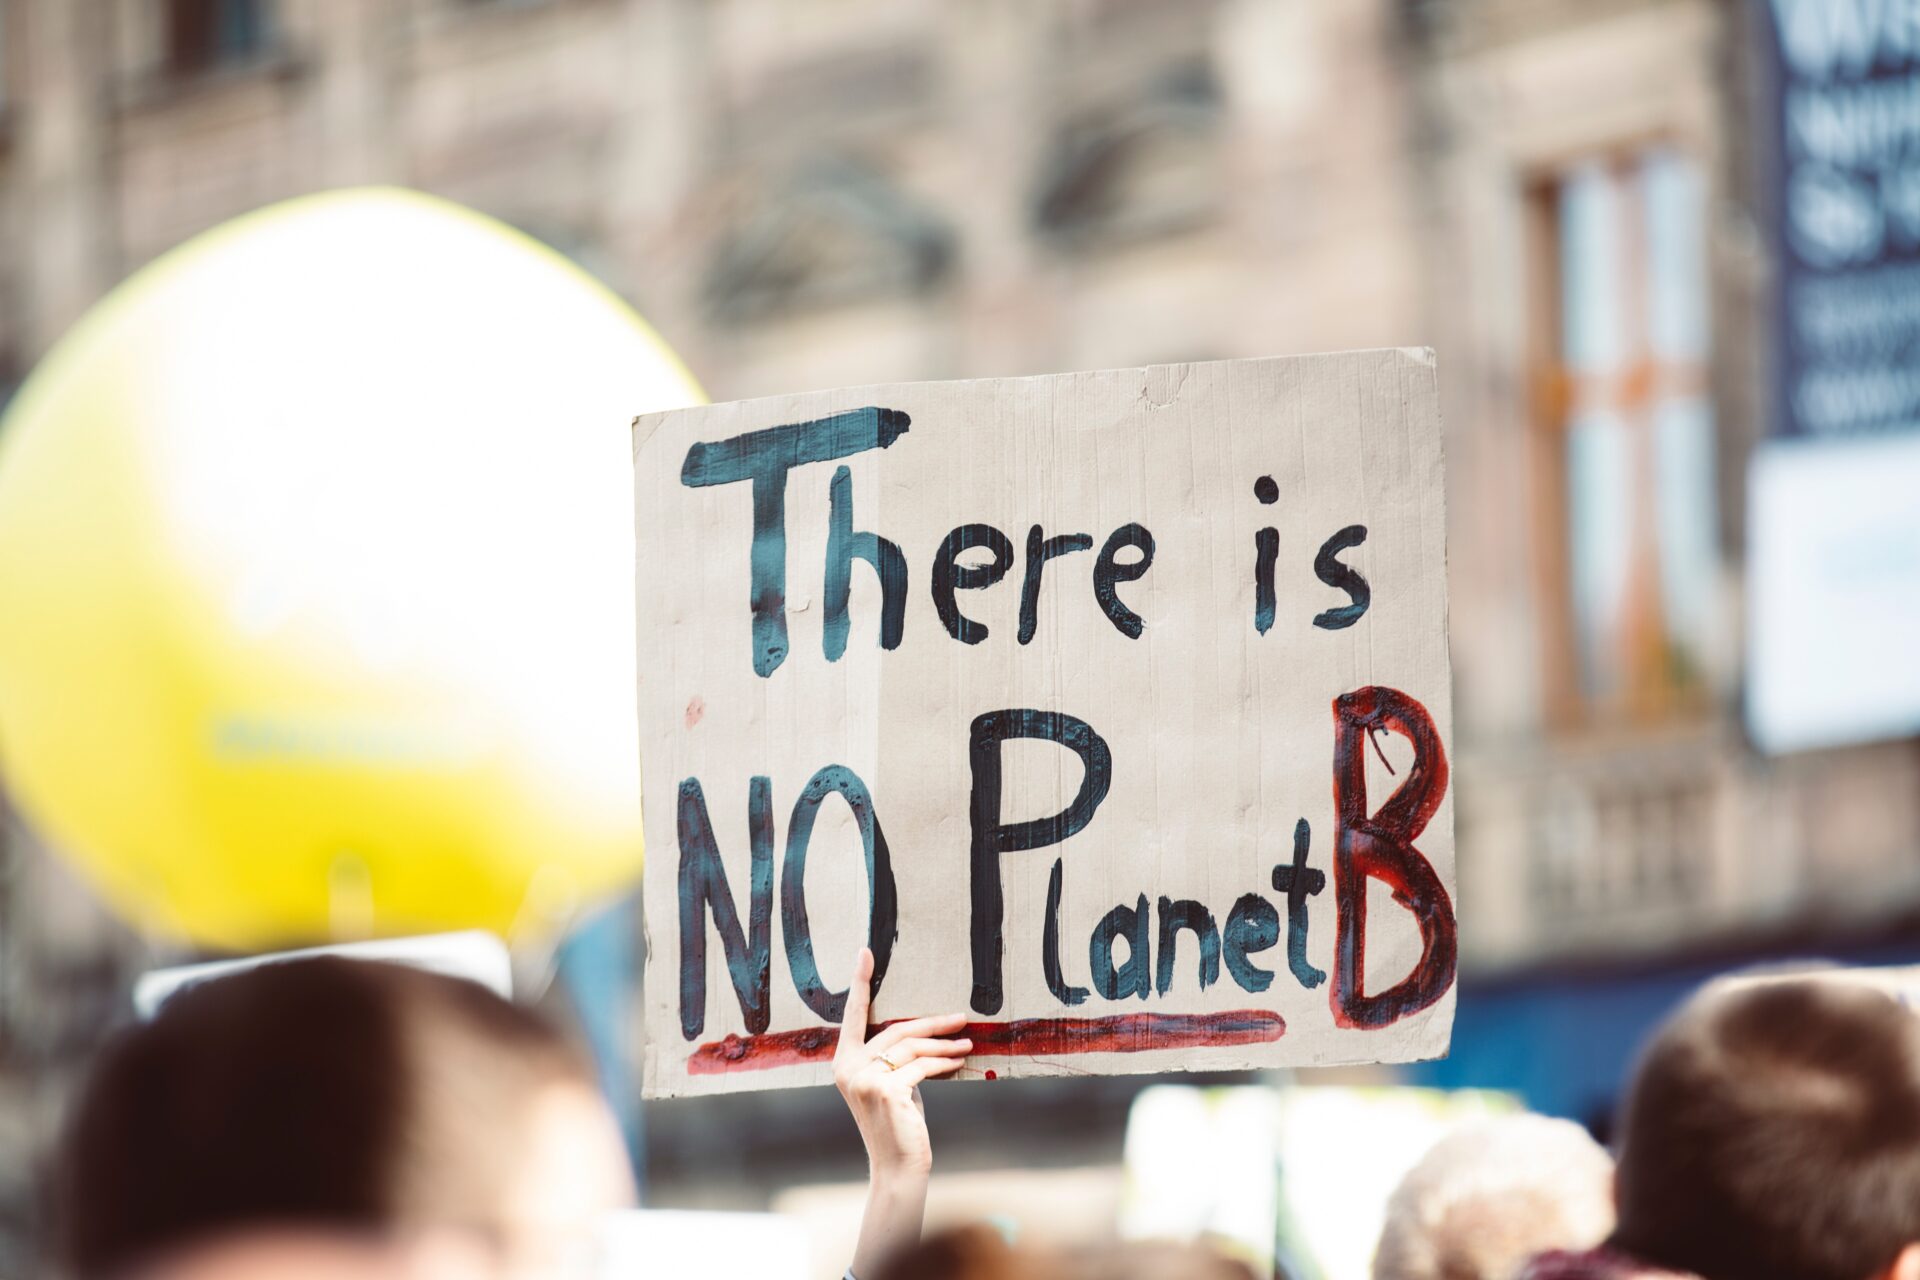 A placard, held aloft, reading "There is NO Planet B", written in black paint.